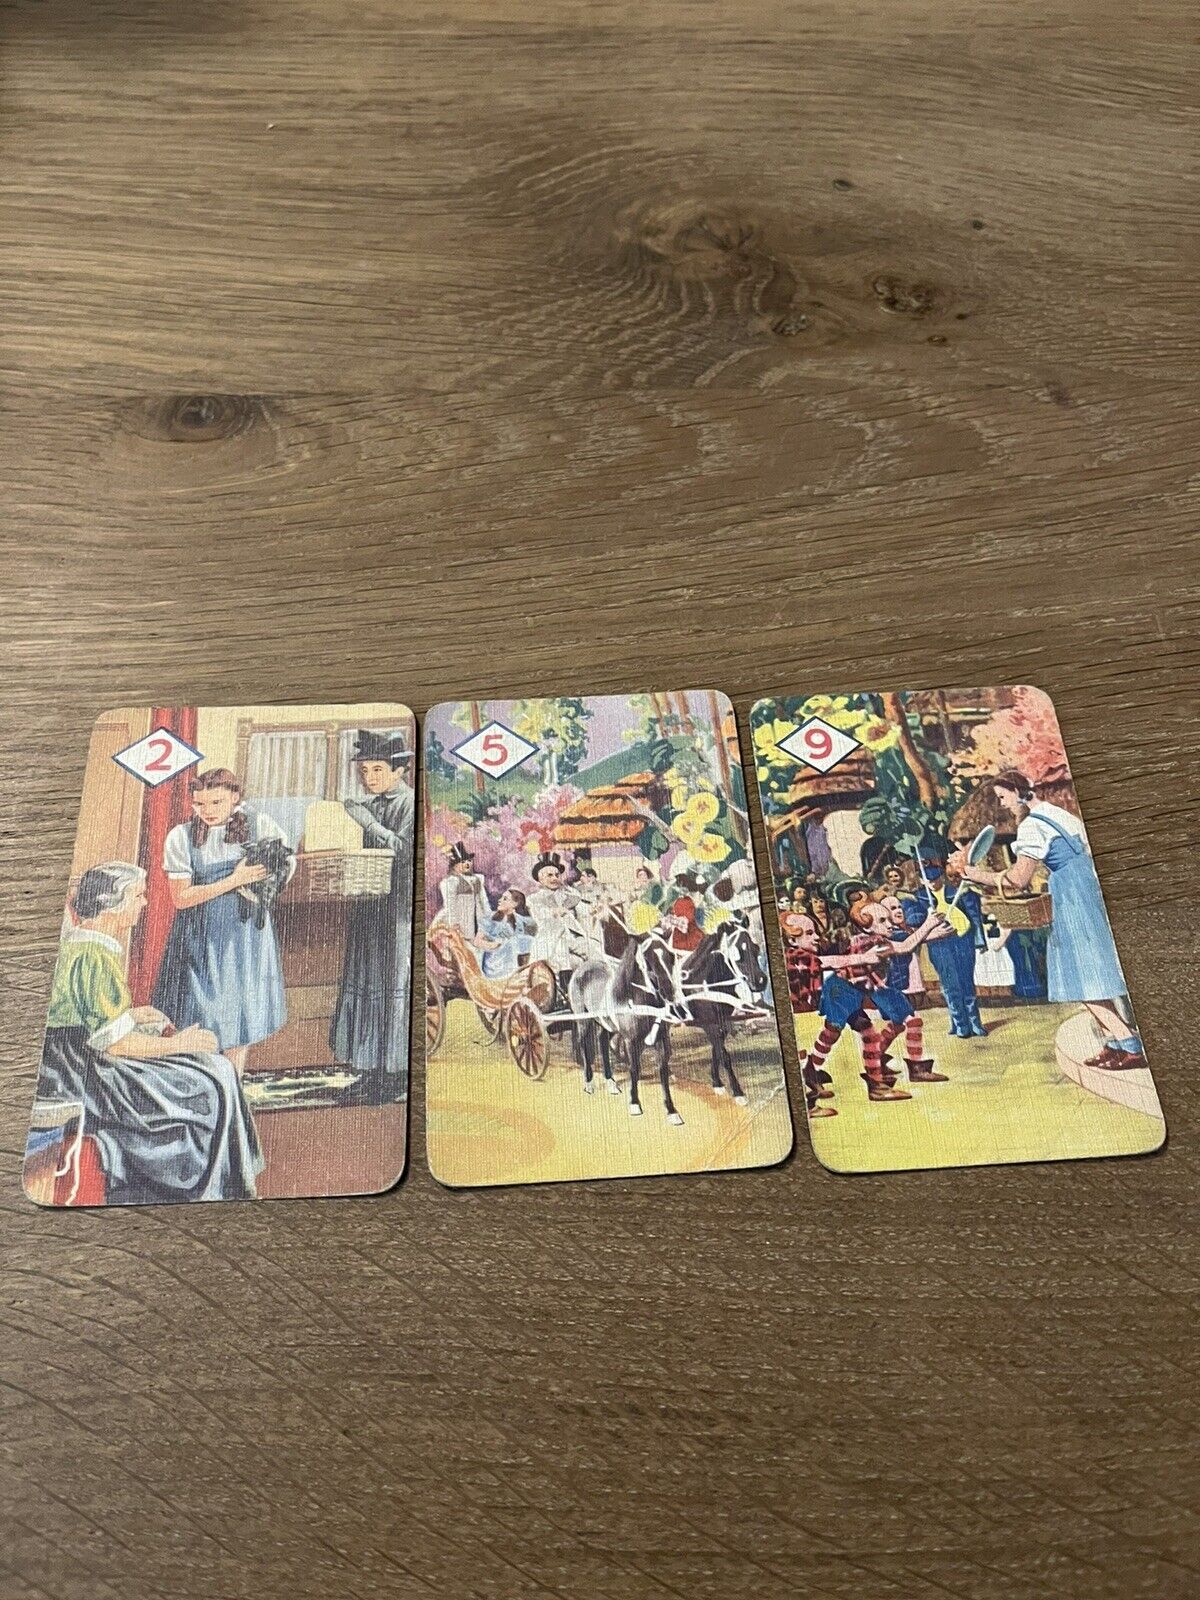 Wizard of Oz 1940 Card Game by Pepys Extremely Rare Vintage Cards Nearly Antique